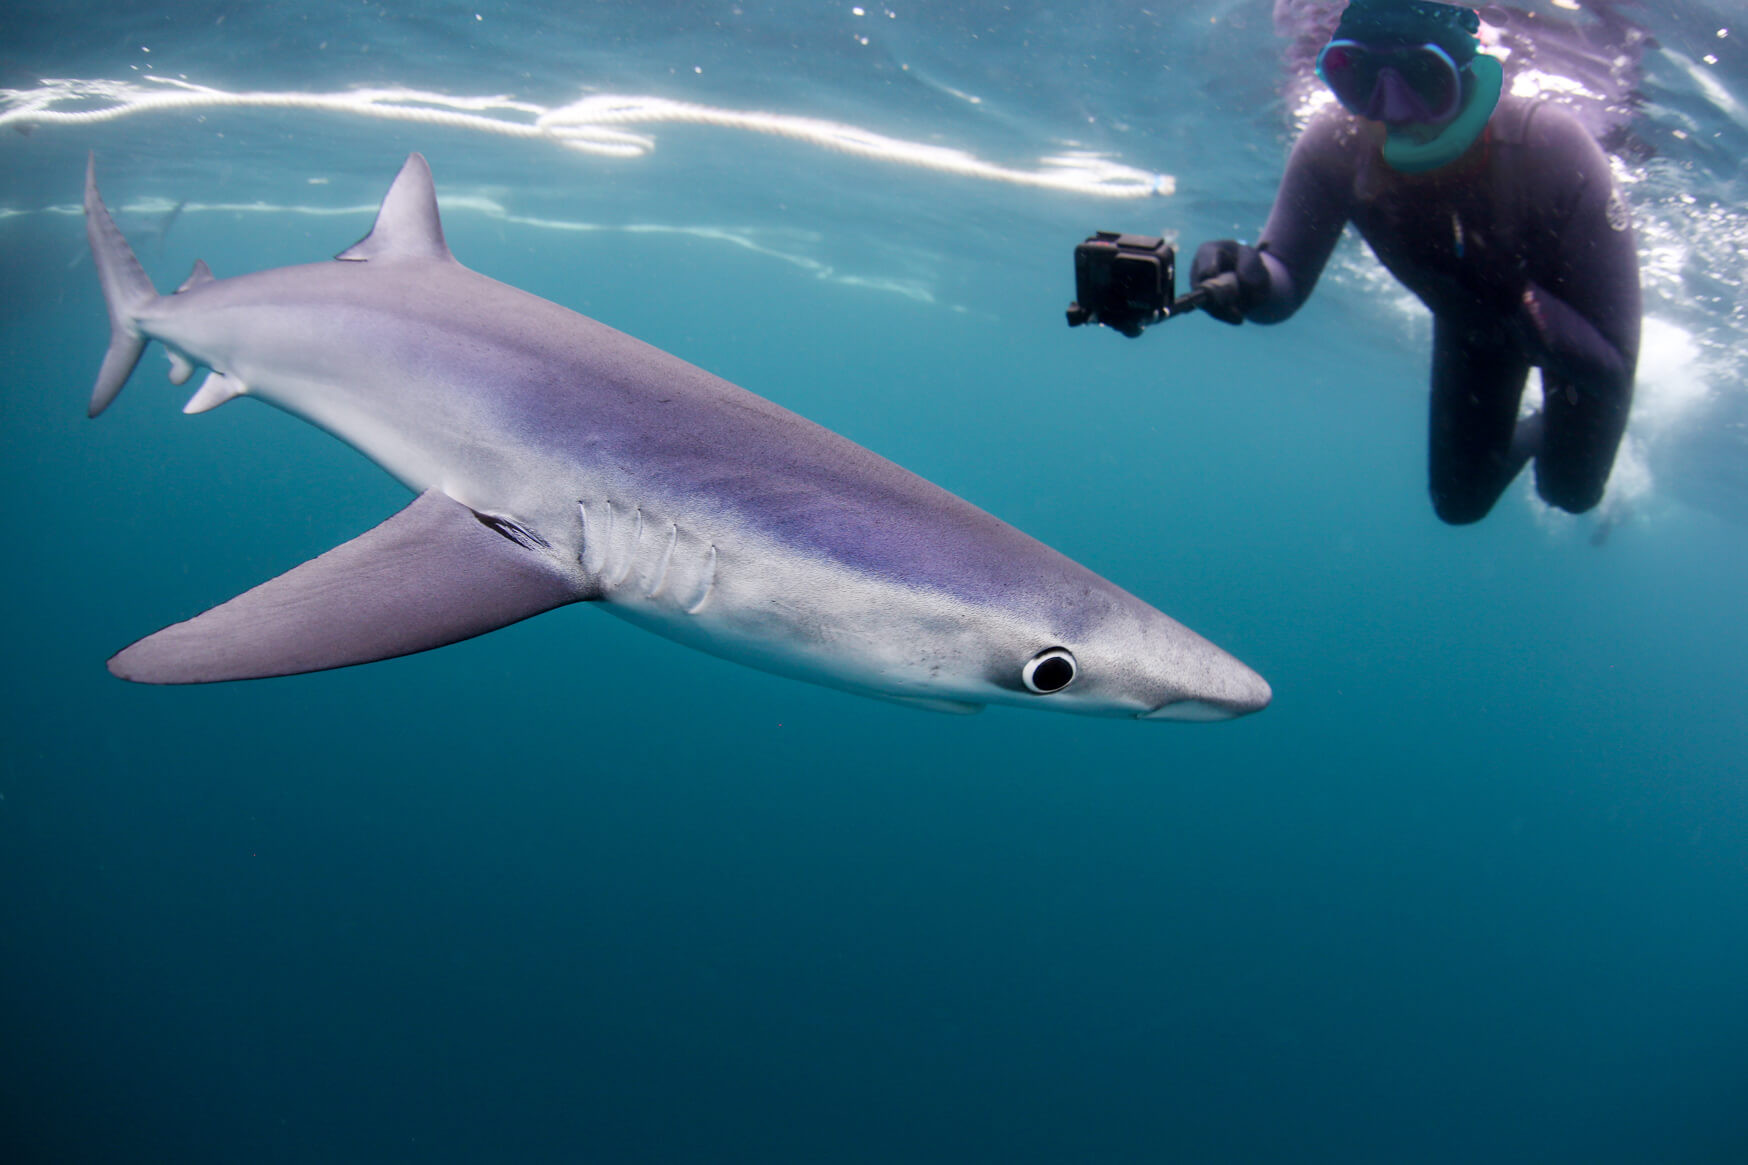 Snorkelling with blue sharks off West Cornwall